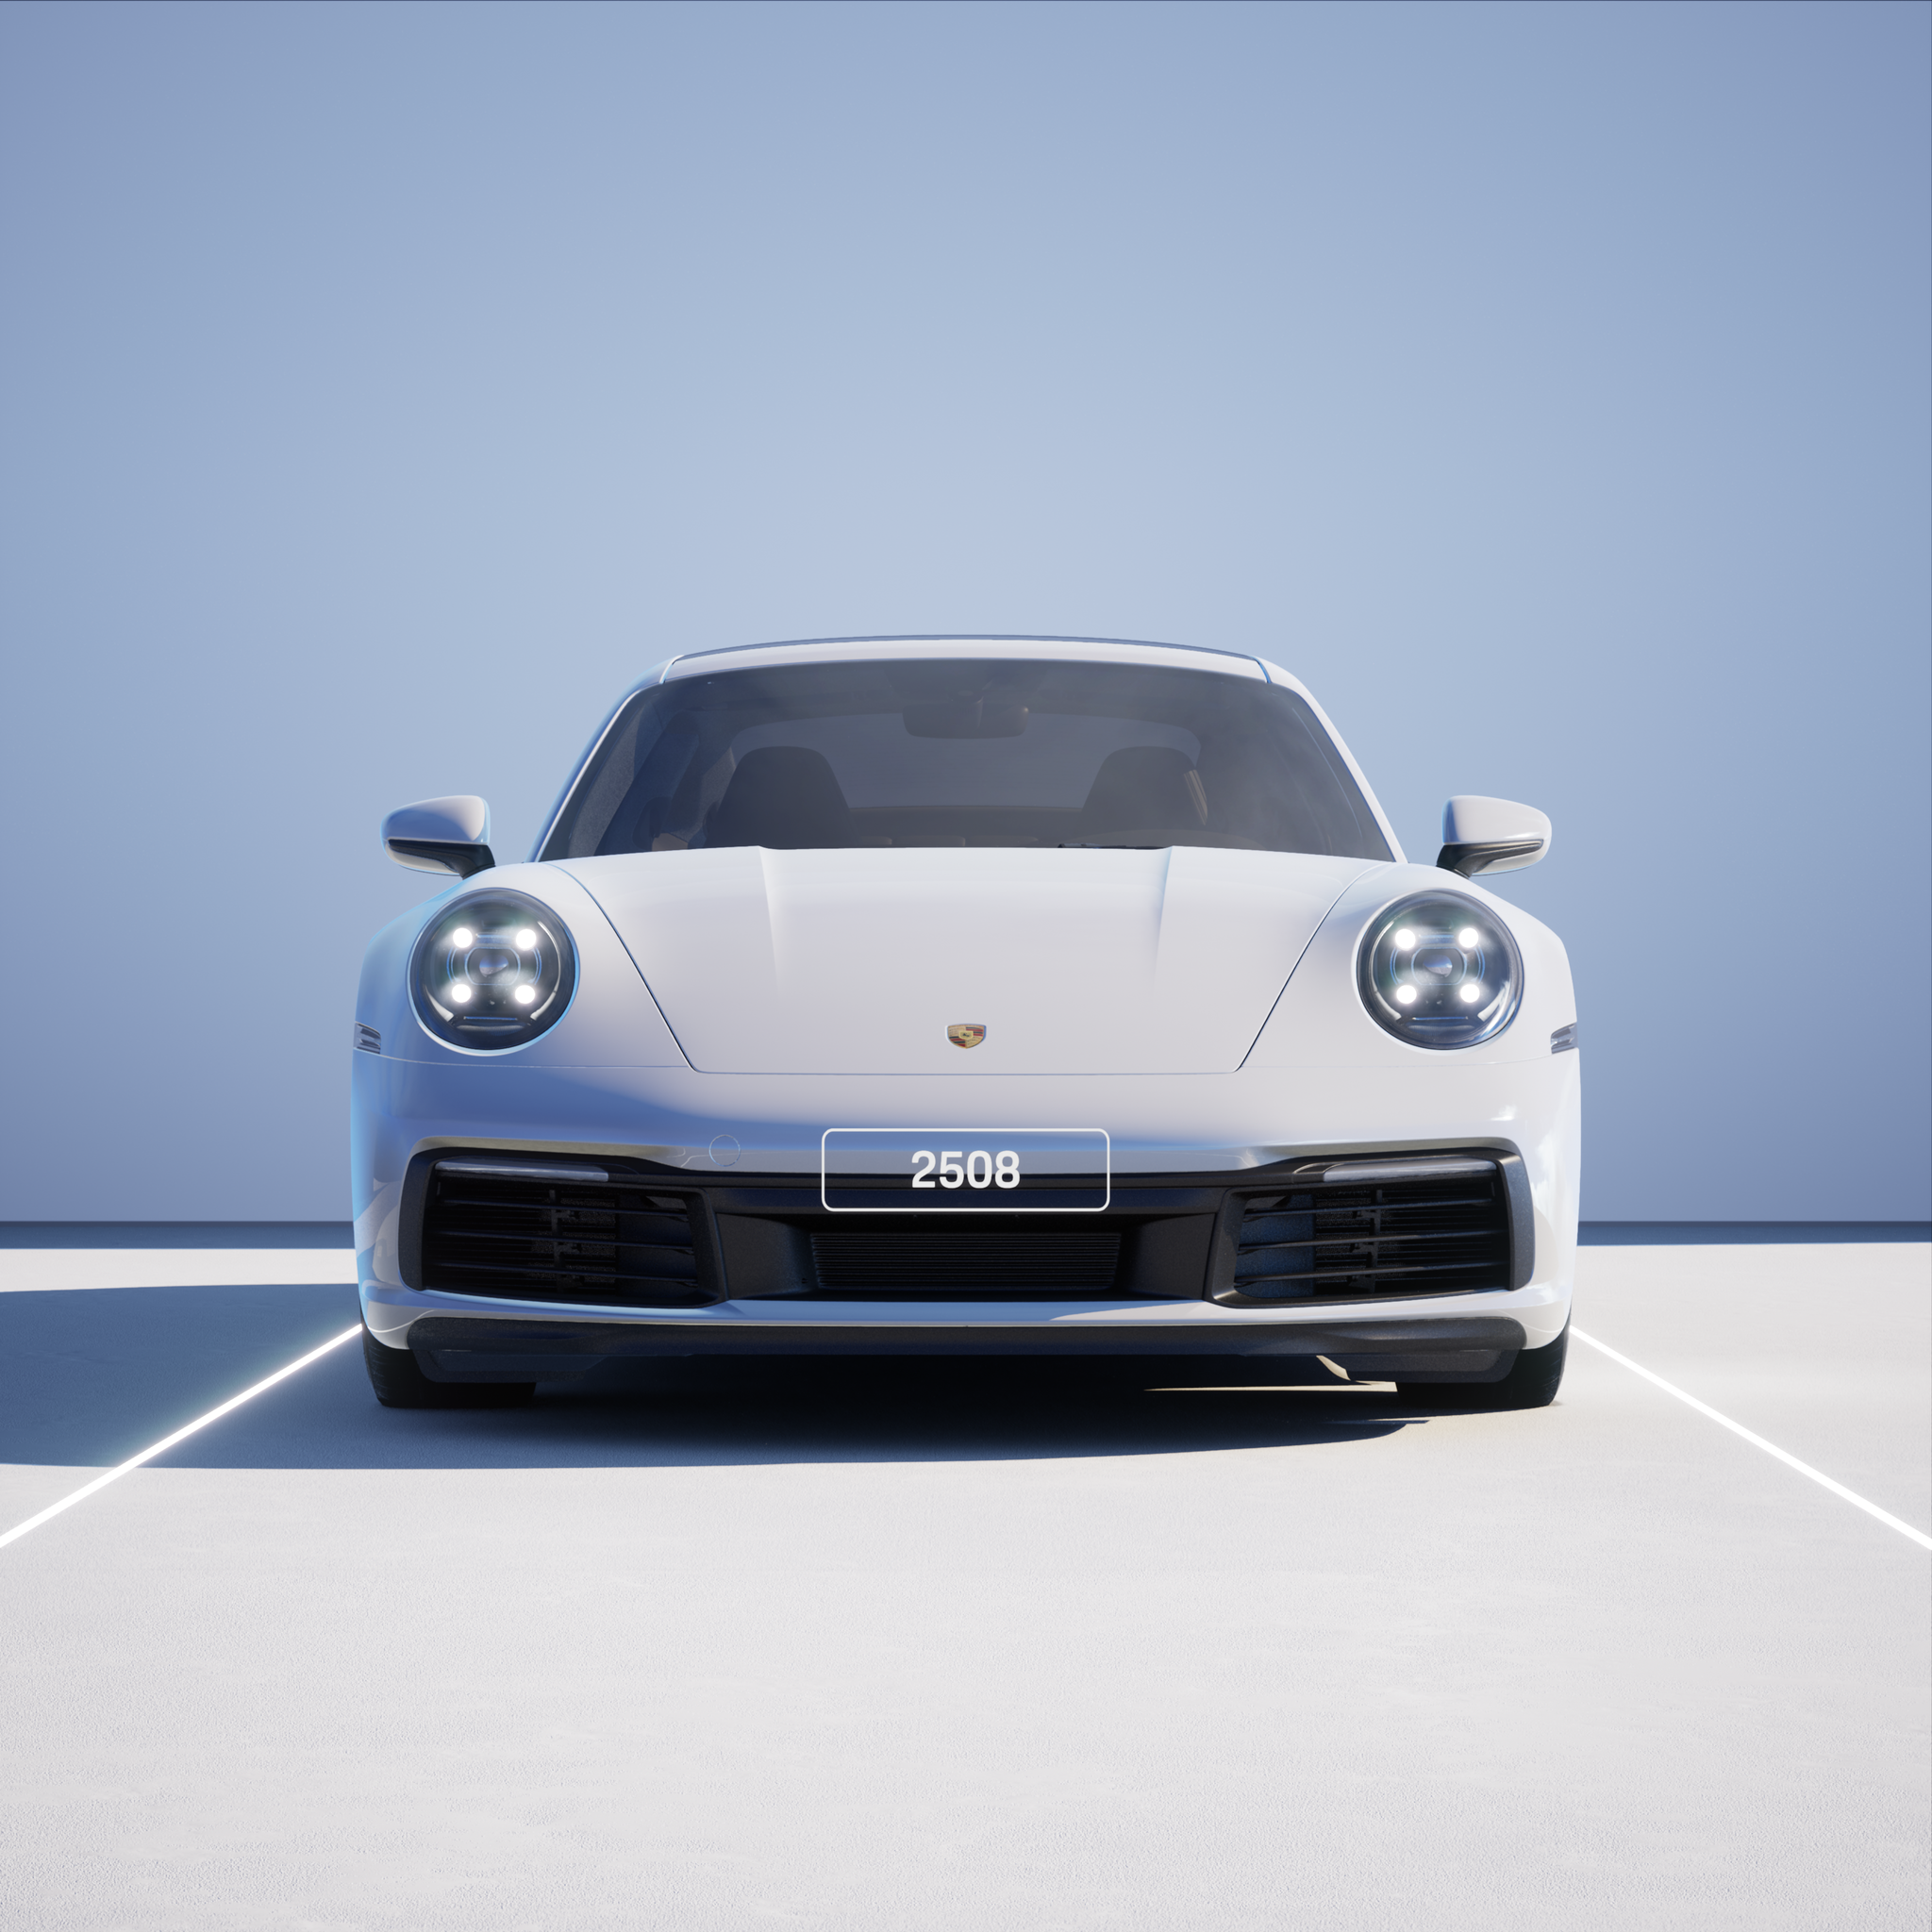 The PORSCHΞ 911 2508 image in phase